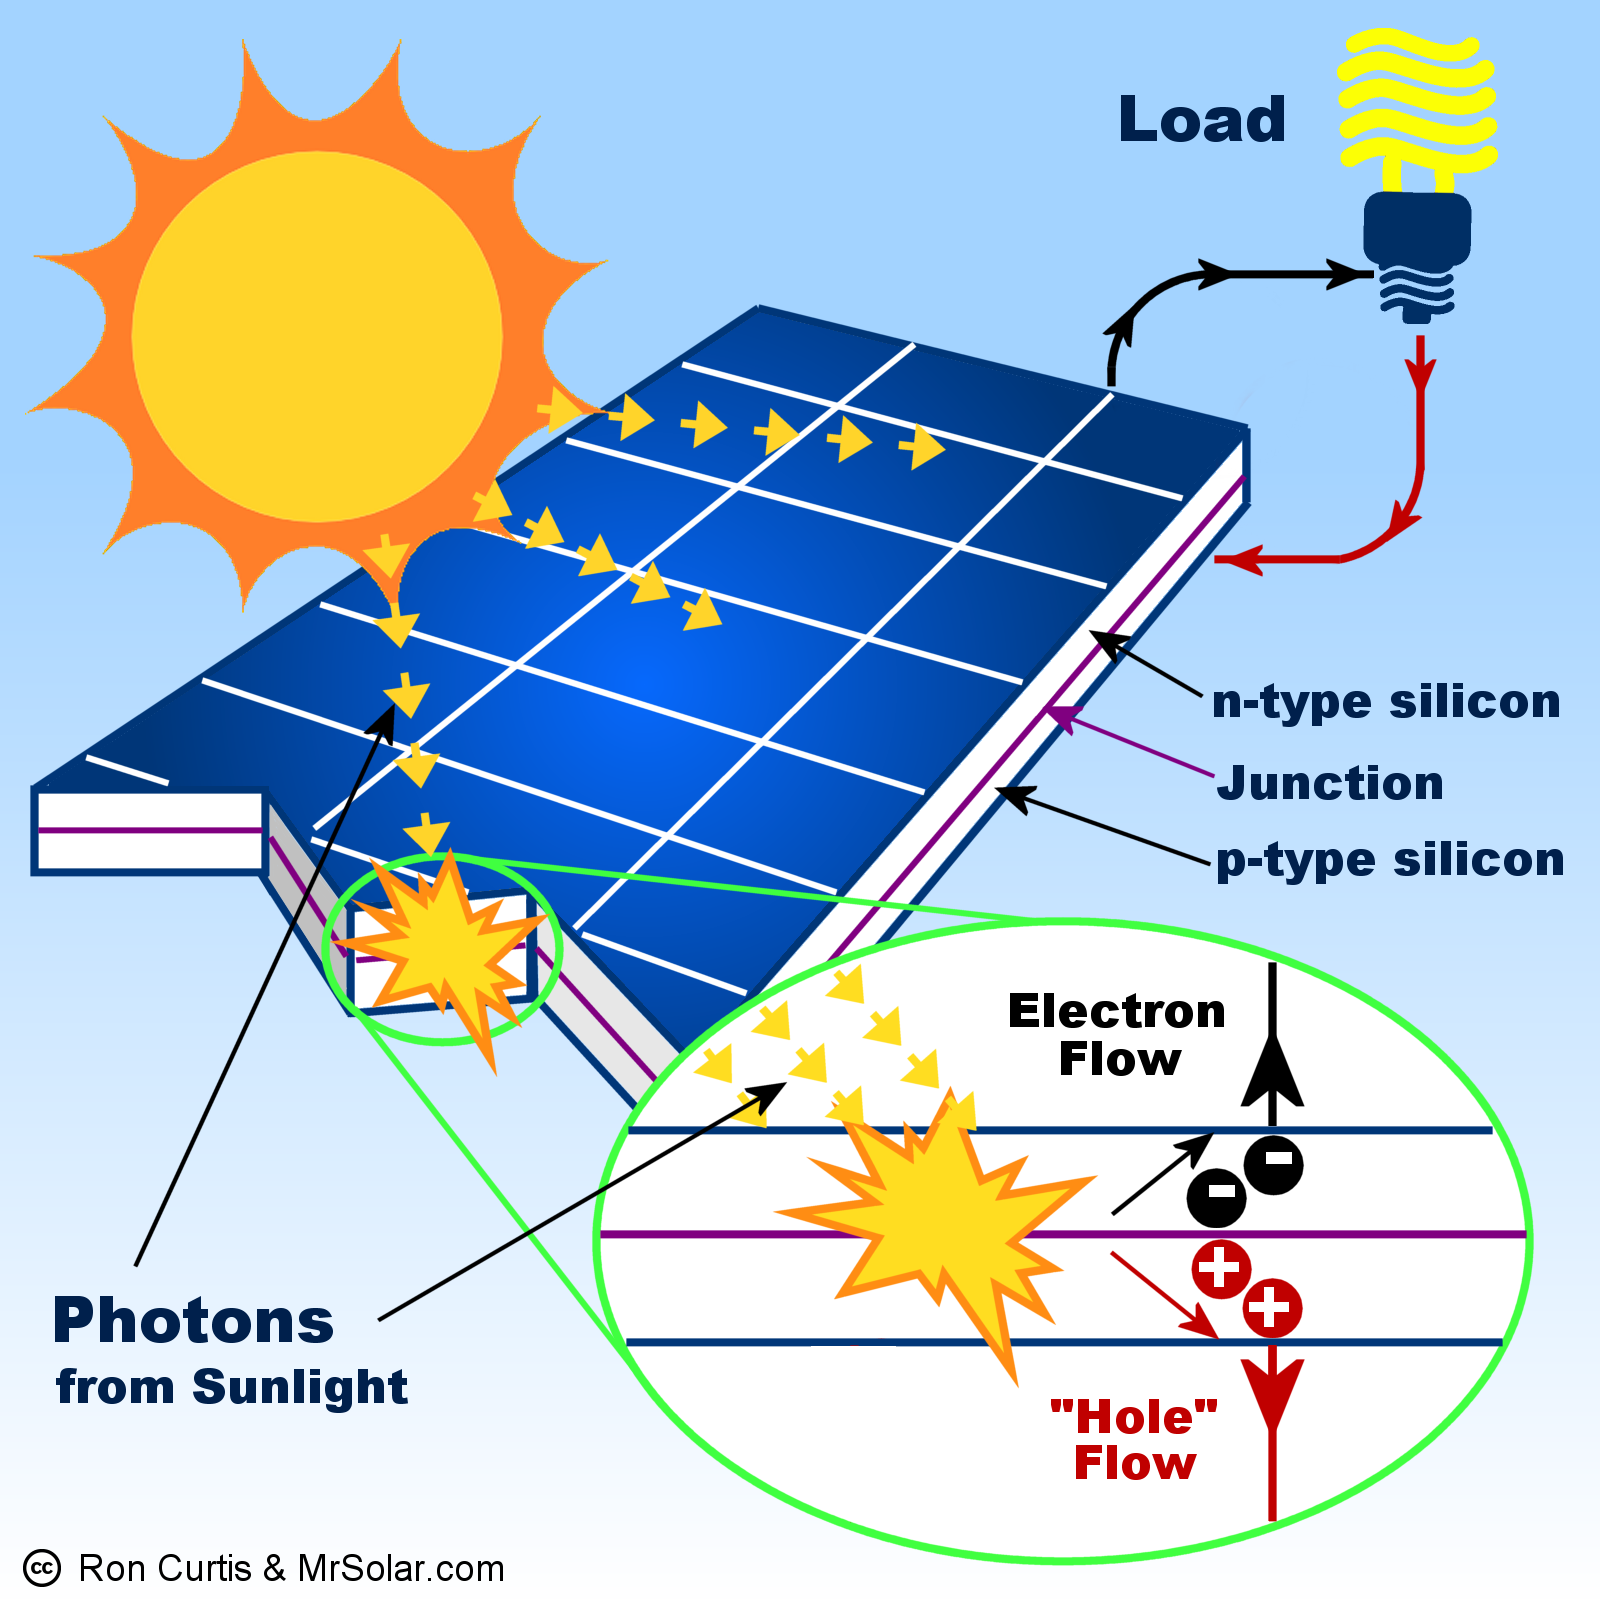 What Is A Solar Panel? How does a solar panel work?